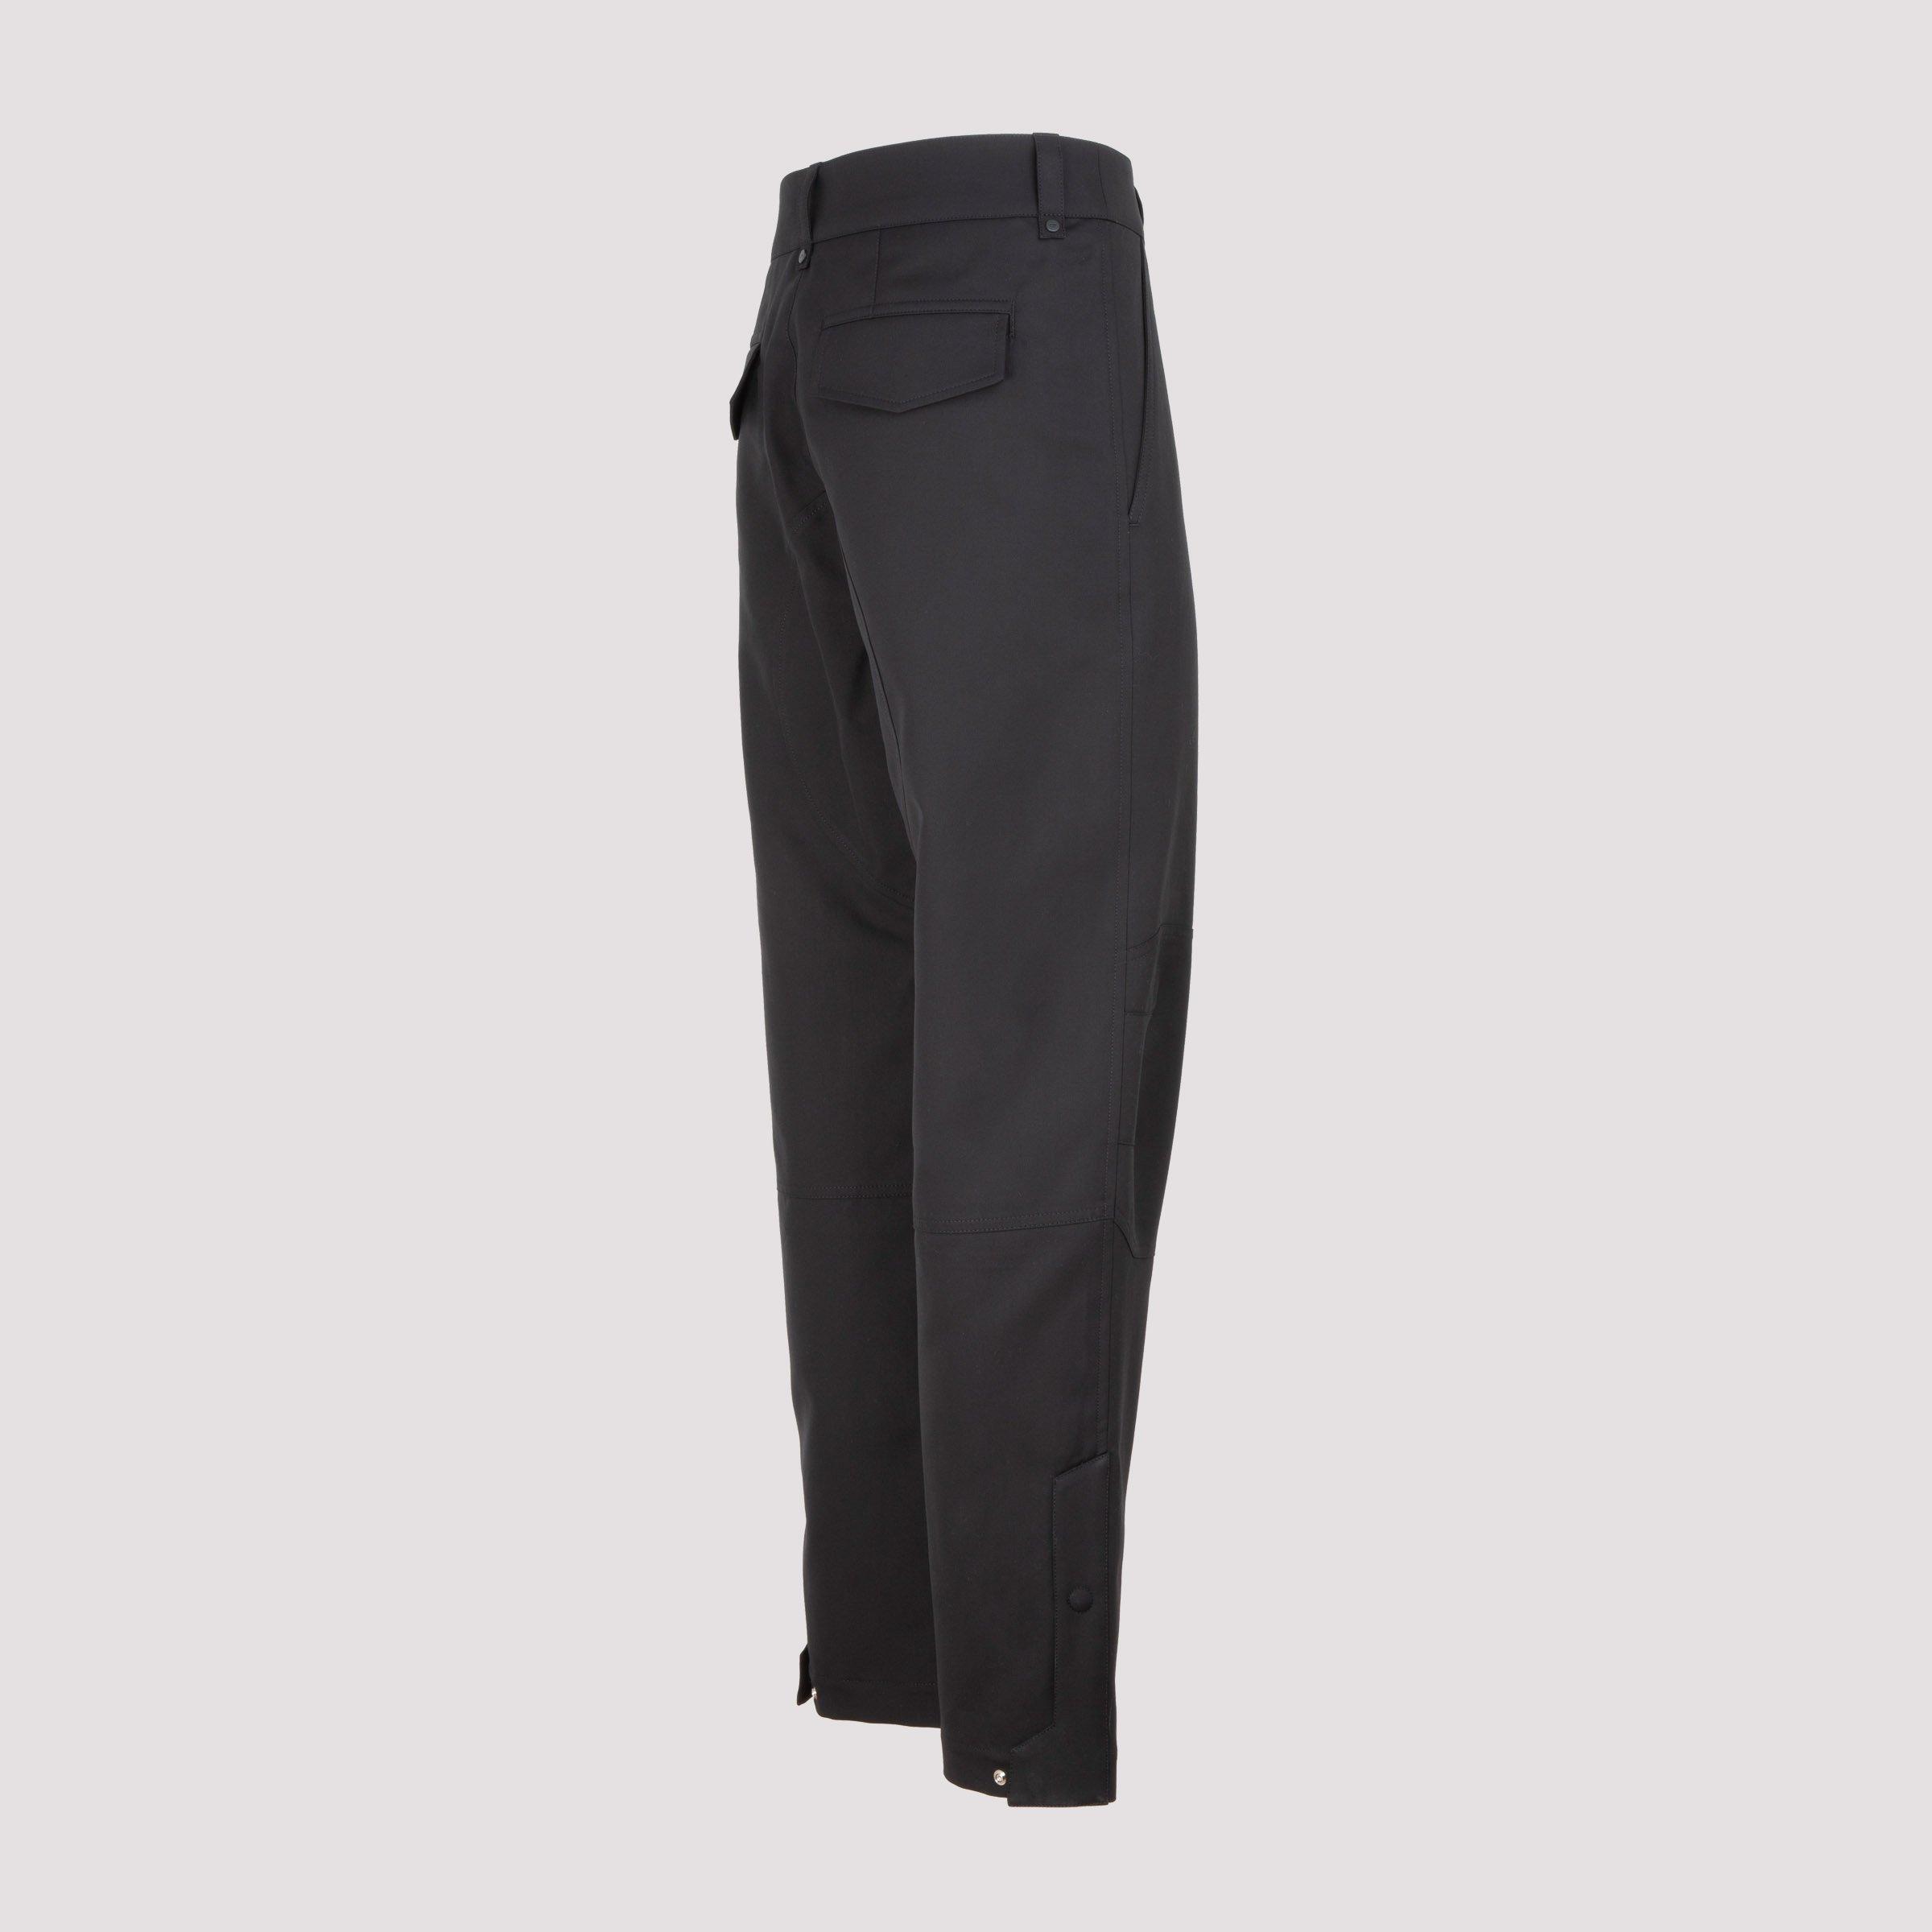 Dior Cotton Strap Detailed Cargo Pants in Black for Men - Lyst